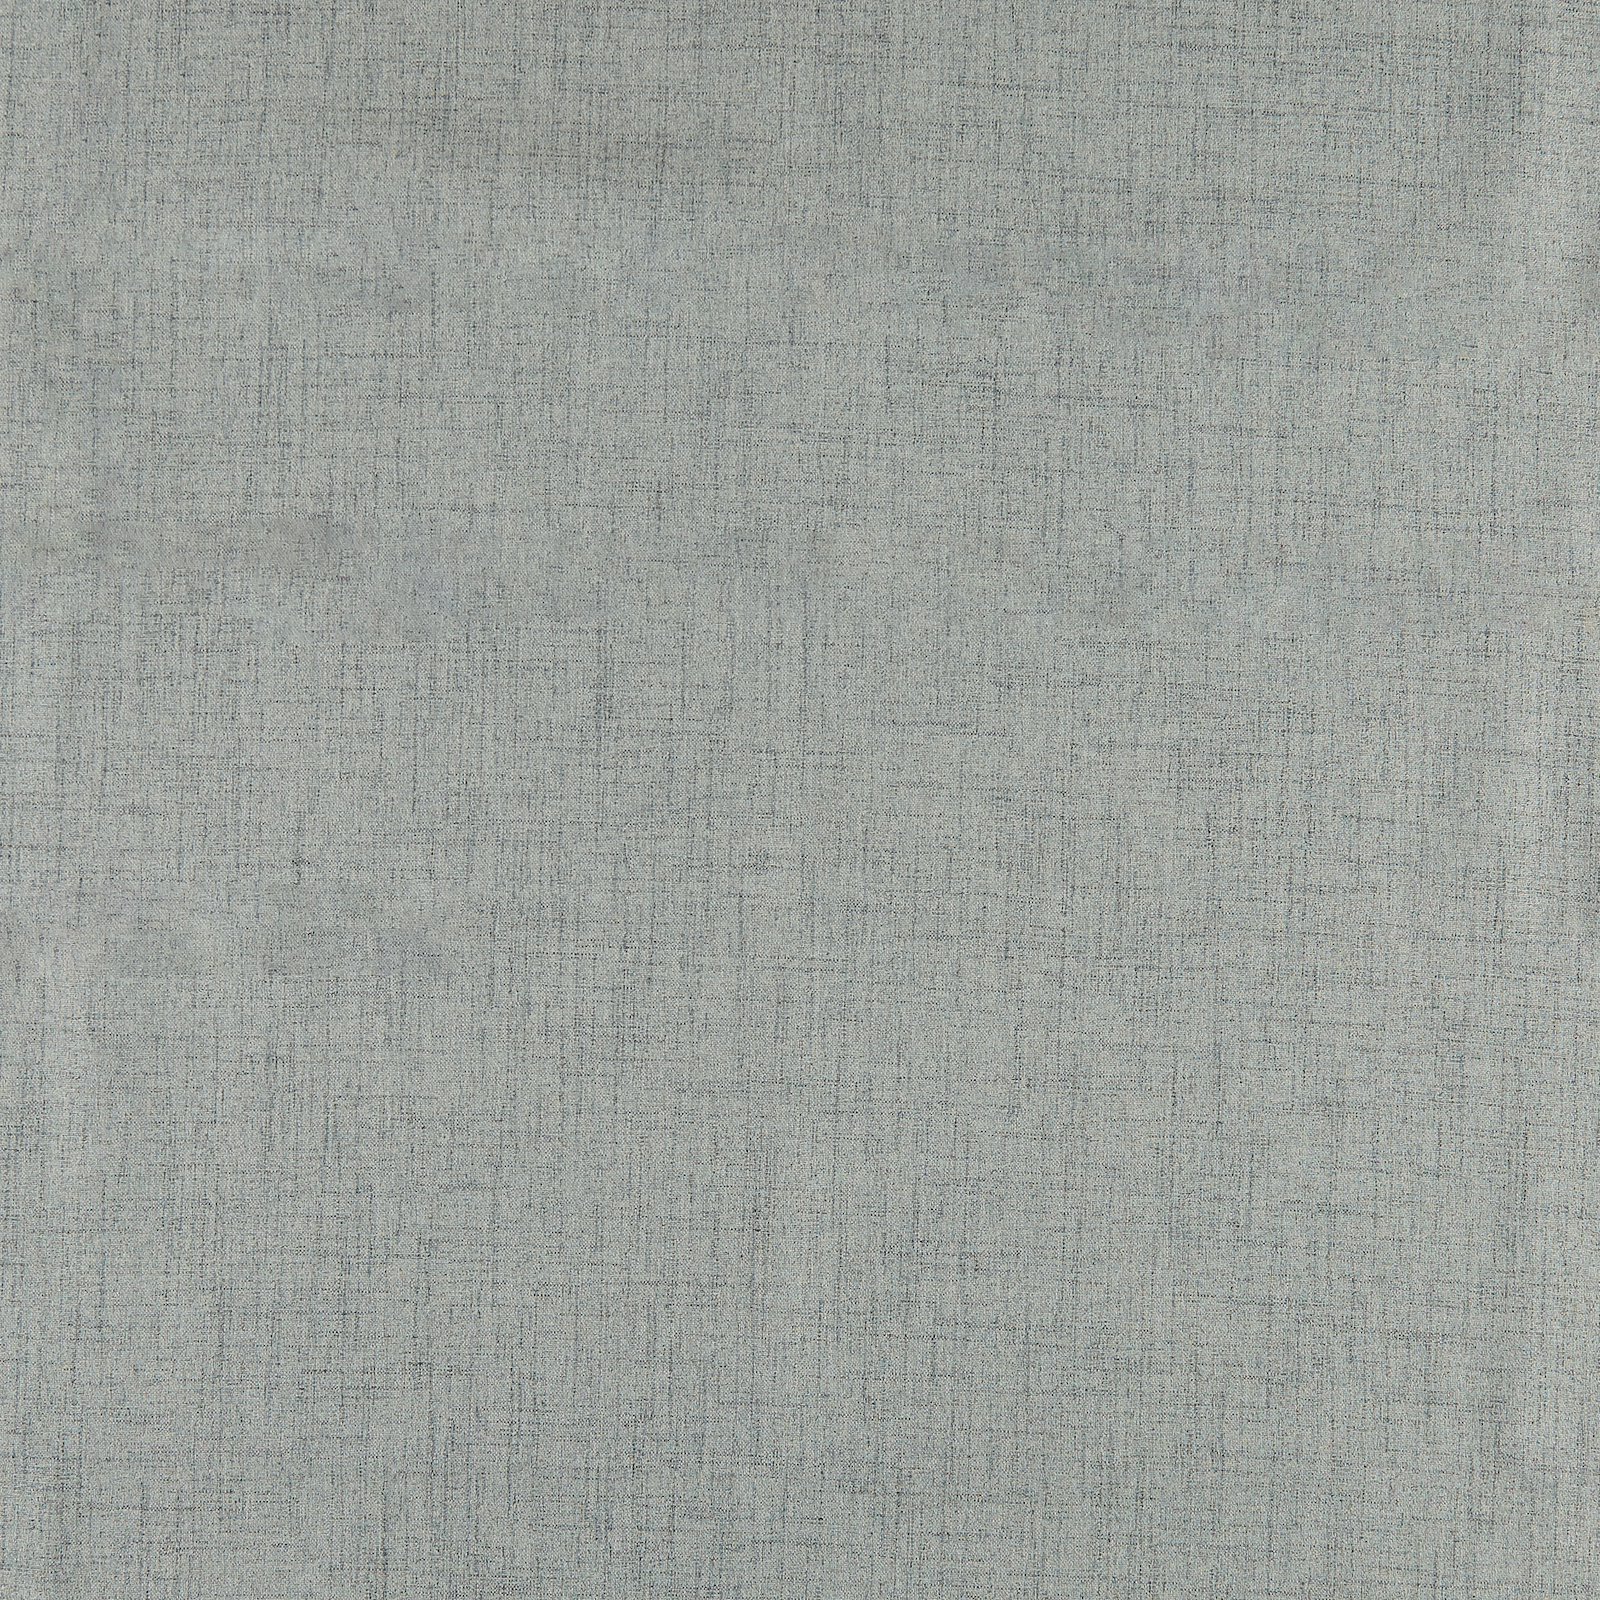 Upholstery fabric w/backing grey 823953_pack_solid